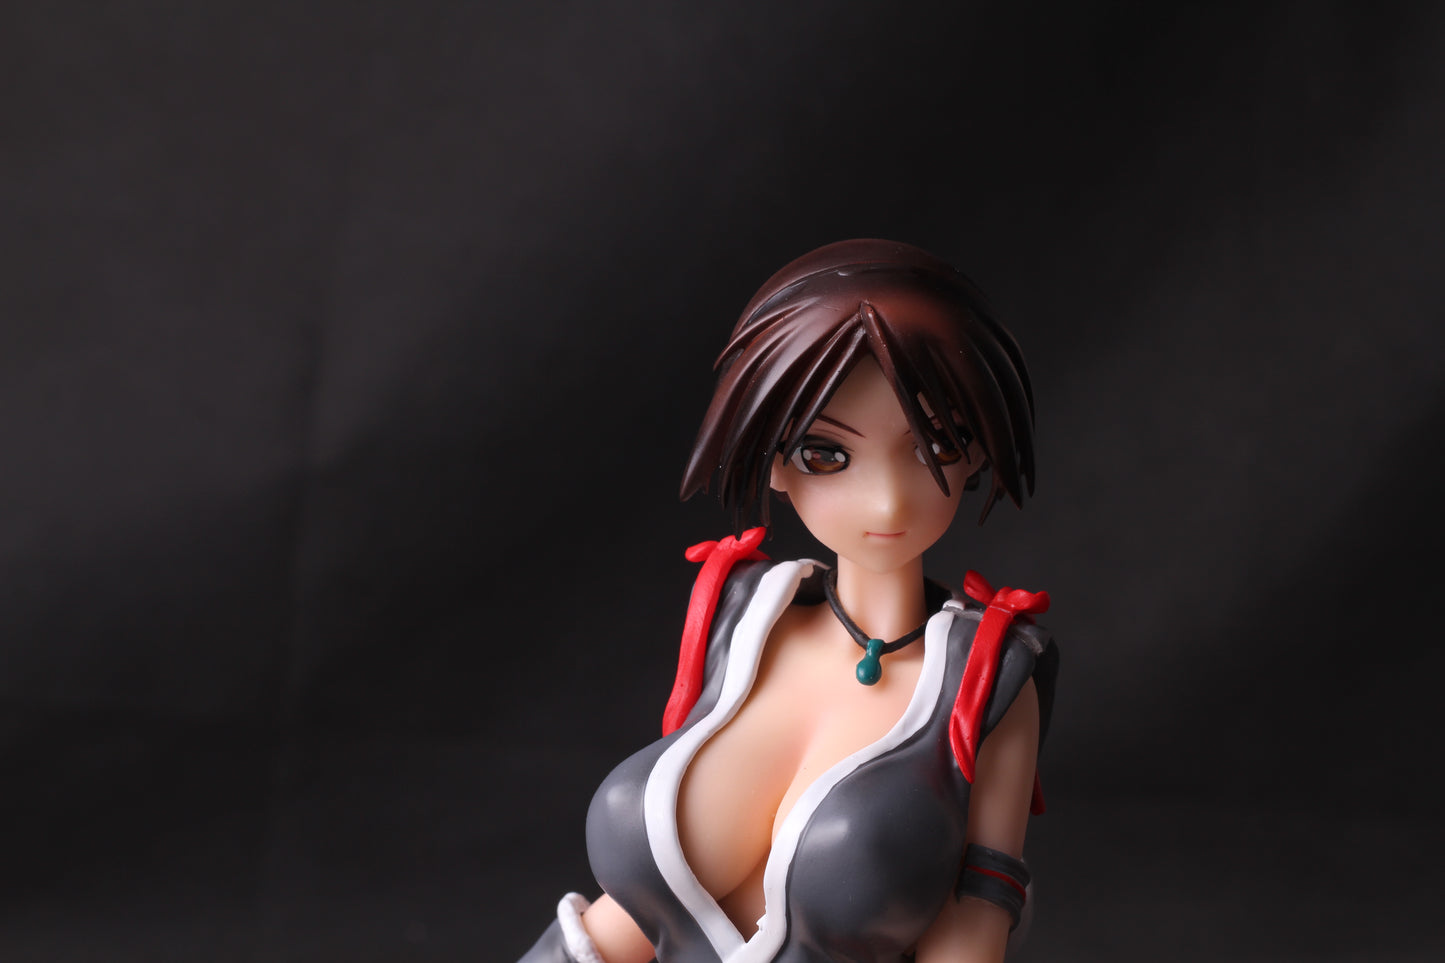 Japanese anime High School DxD sexy Rias Gremory naked anime figure resin figure girl